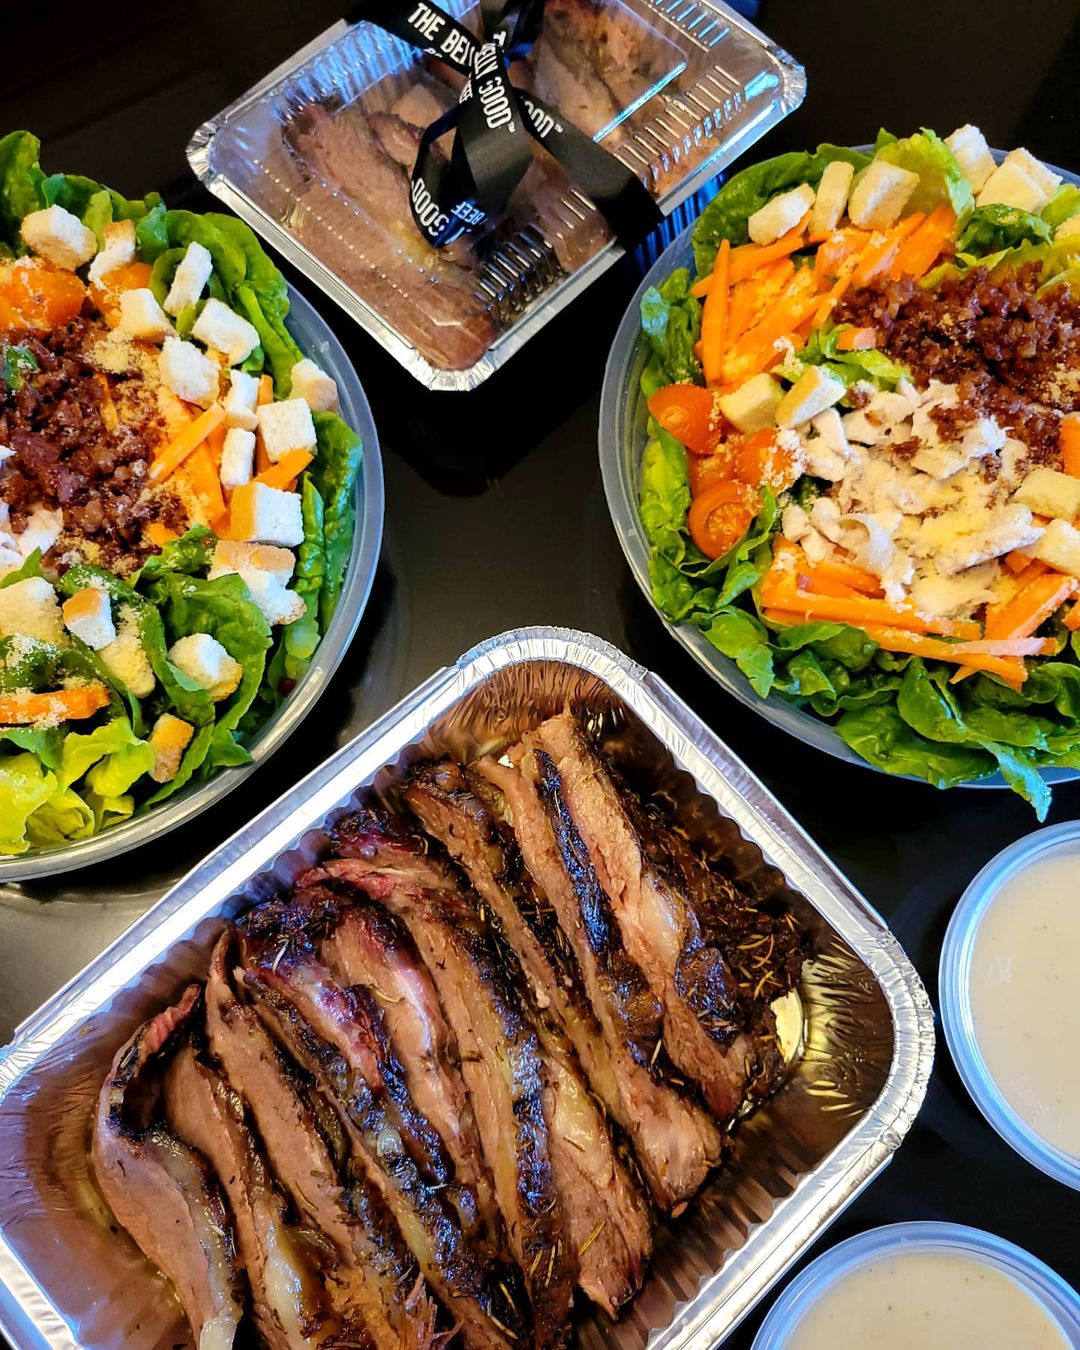 Ribs and Salads. Photo by Instagram user @thebellygoodroastbeef